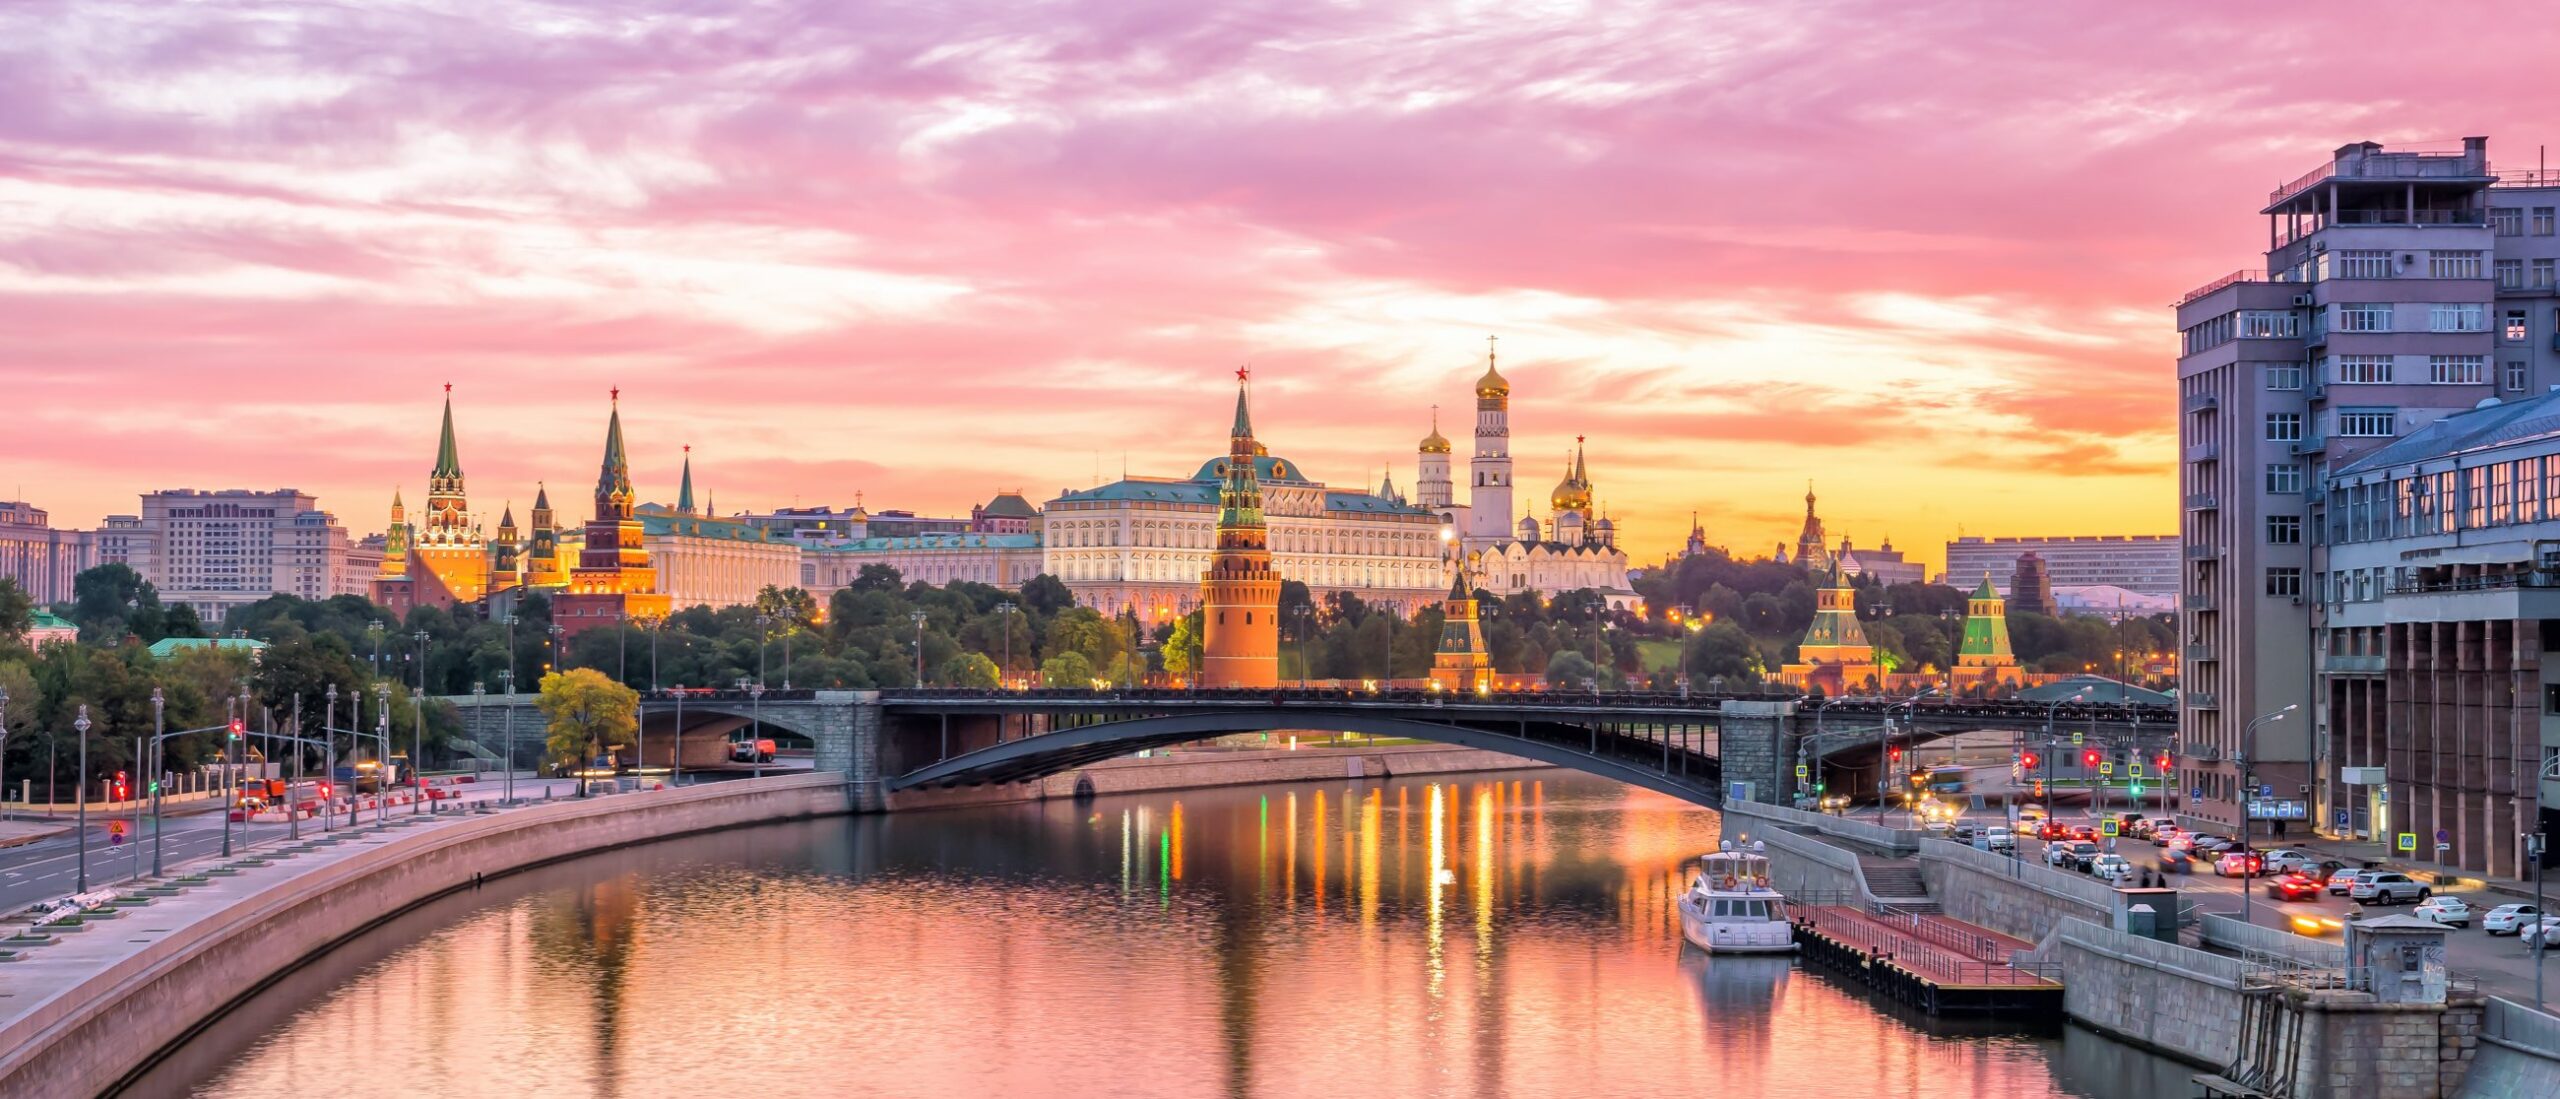 Two Days in Moscow: The Top Things to Do in the City